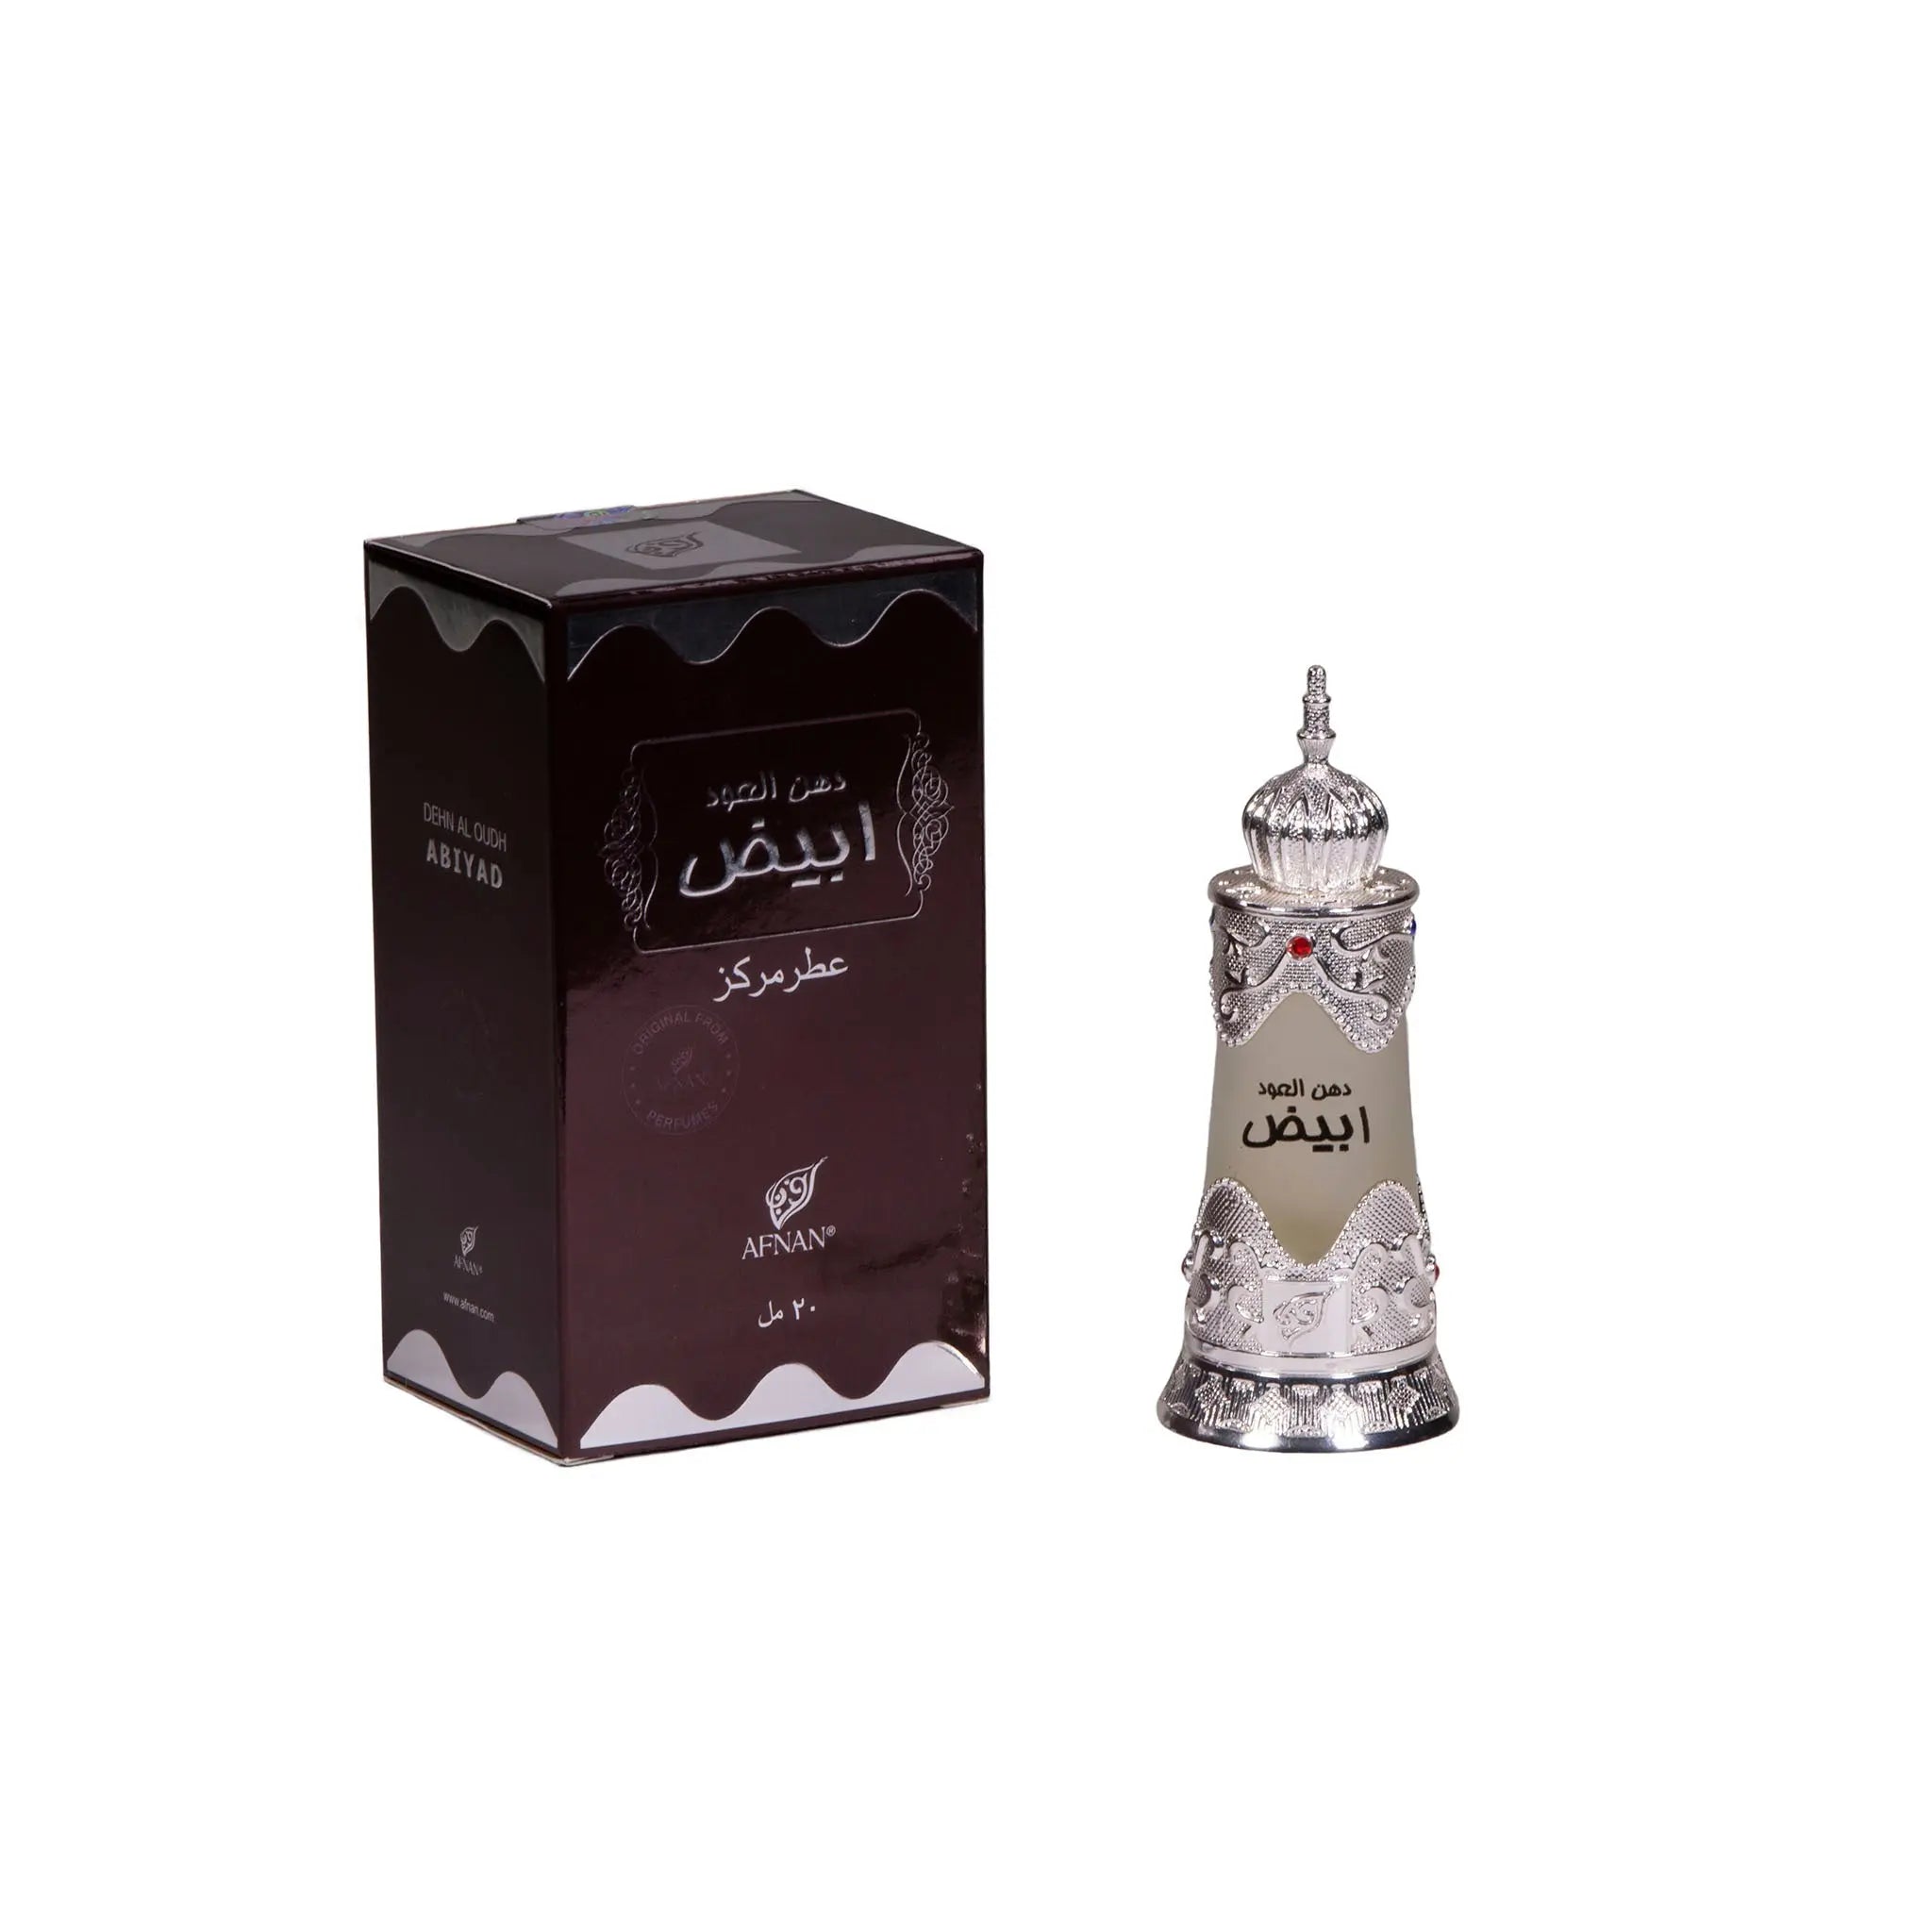 The image shows a set of Arabic perfume products, including a box and a bottle. The box is dark brown with a glossy finish and features intricate white and gold detailing, including Arabic calligraphy that reads "العود" (Al Oud), which suggests that the perfume is of the Oud fragrance variety. The brand name "AFNAN" is also visible on the box. Beside the box stands an ornate perfume bottle, similar to the one described earlier, with intricate silver filigree work and a frosted glass center. 